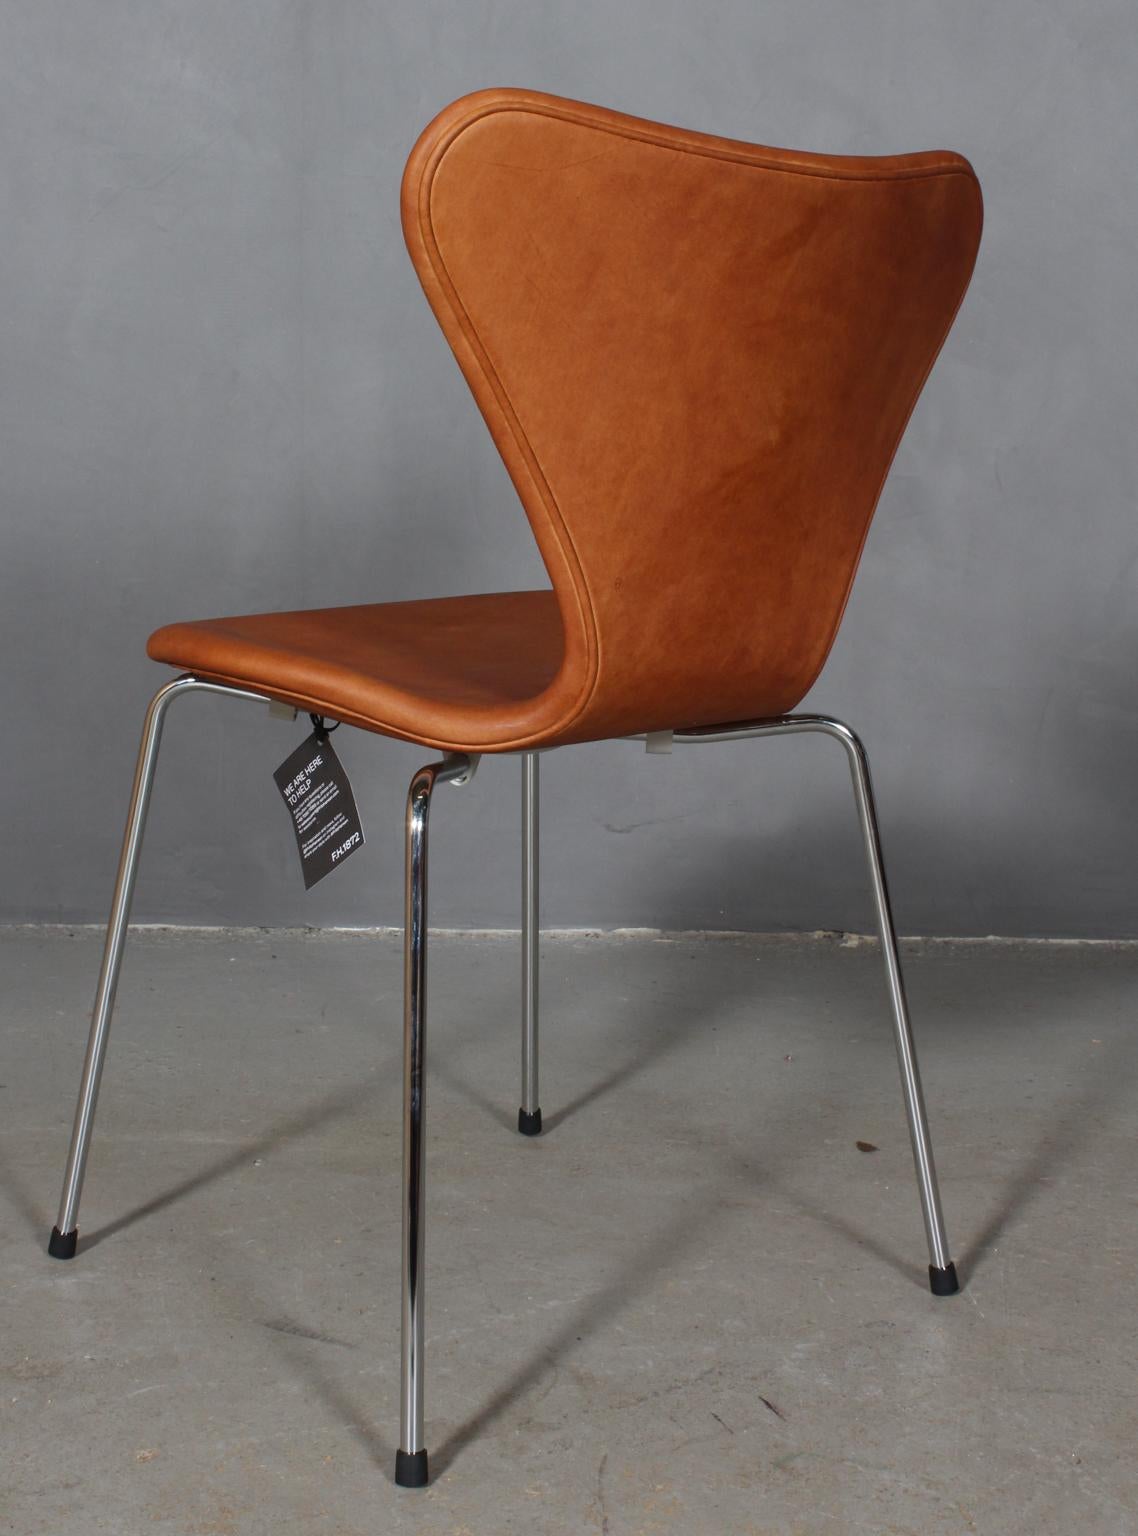 Contemporary Arne Jacobsen Dining Chair For Sale